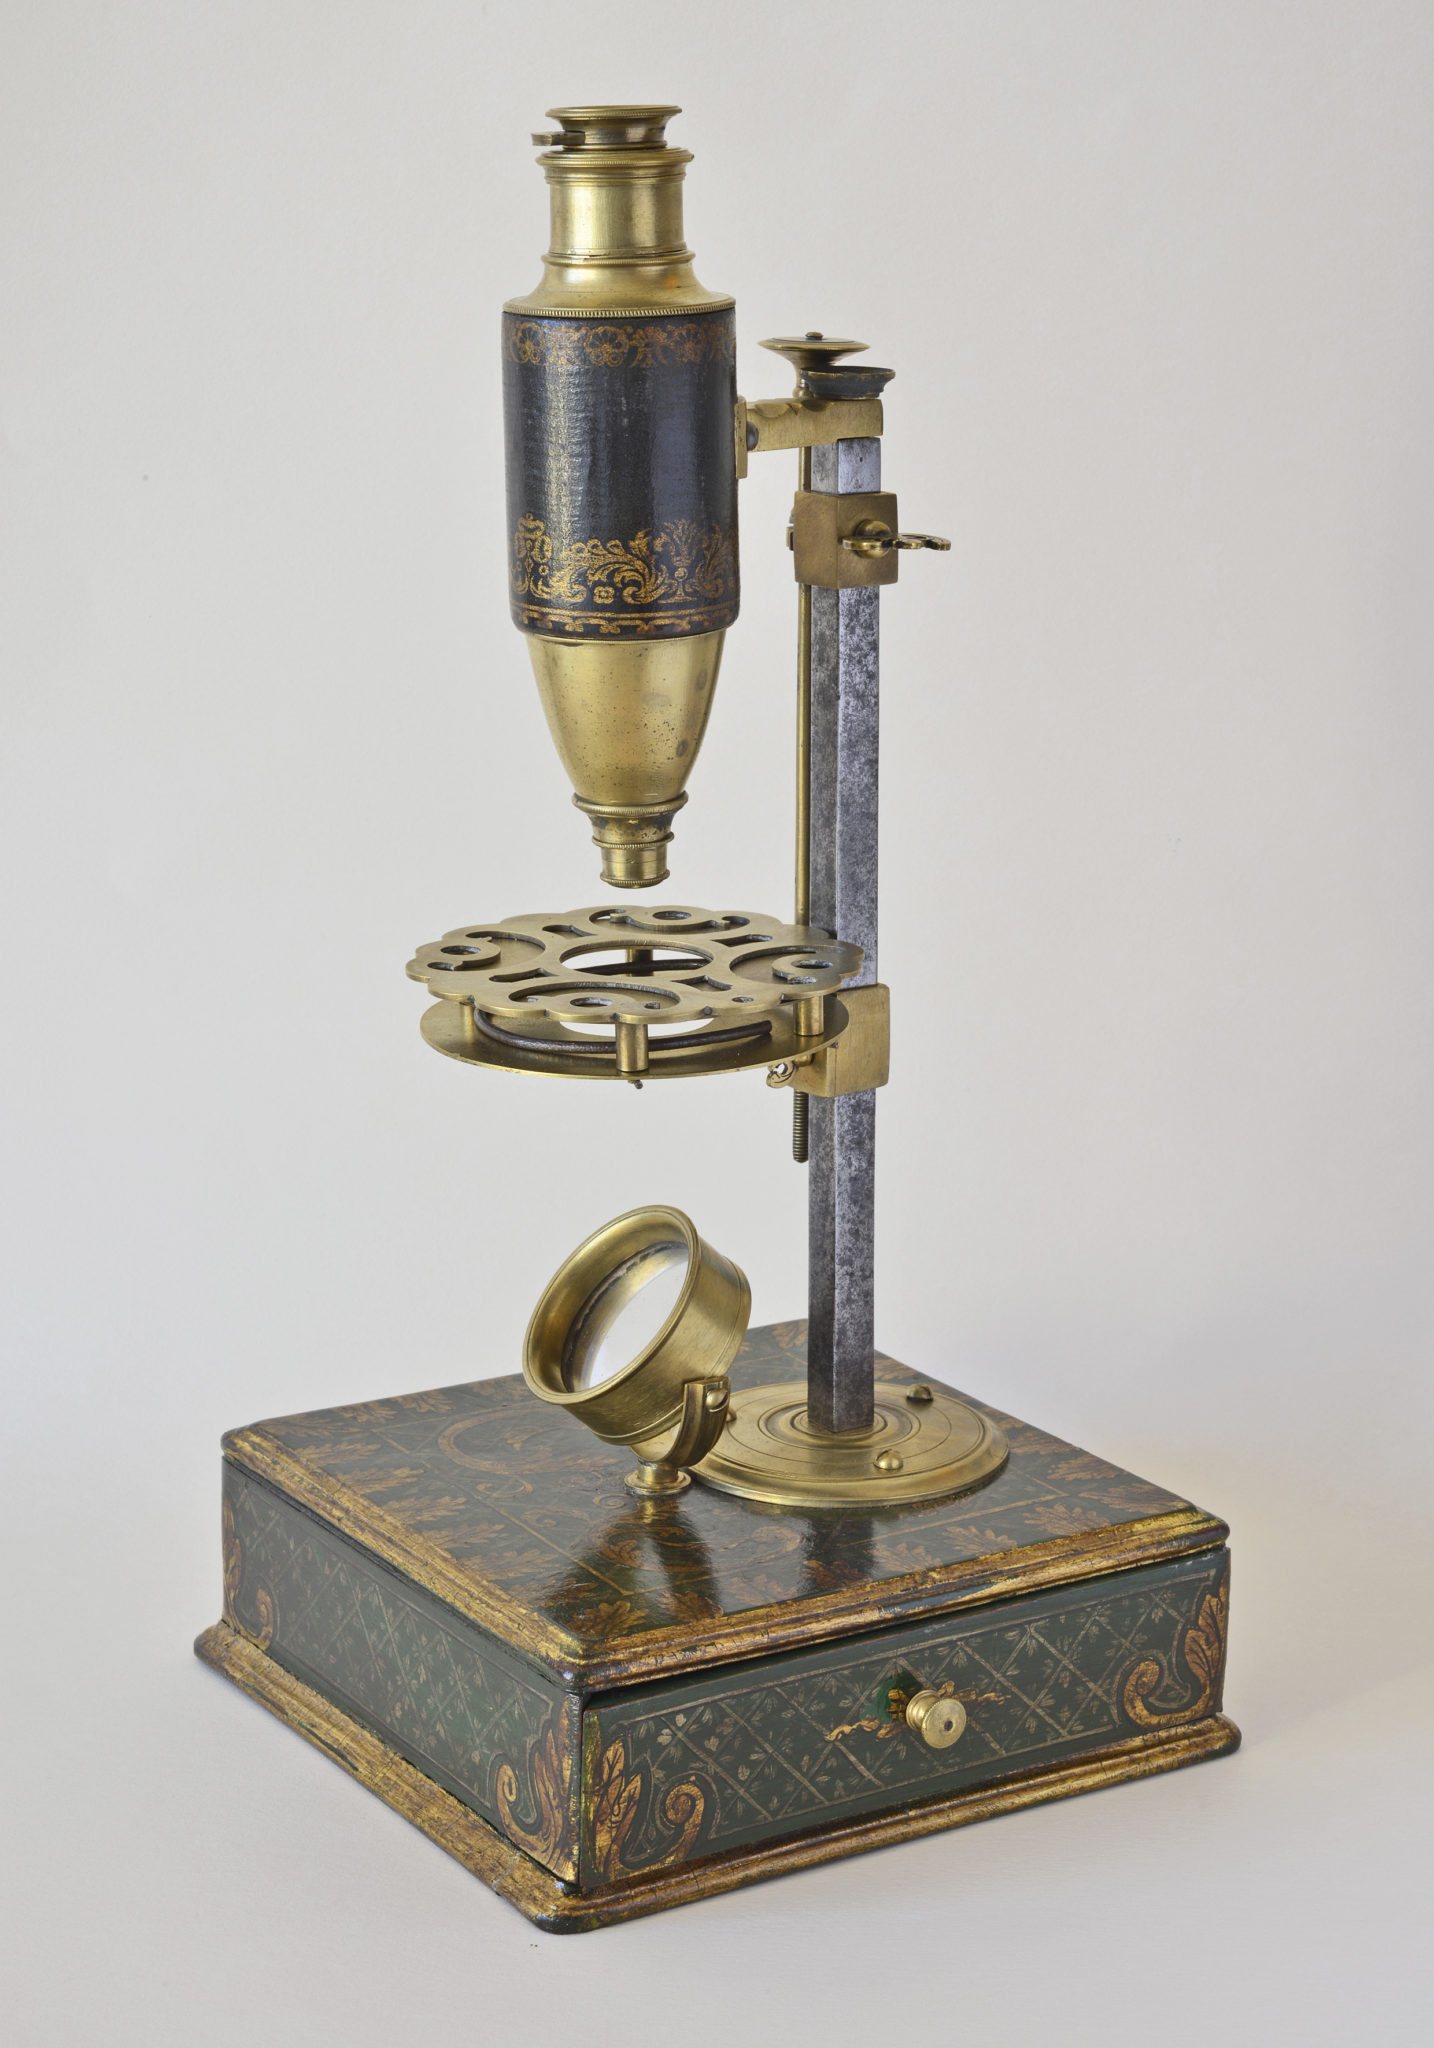 Brass lacquered microscope made in Nuremberg dated 1740 in its original leather box